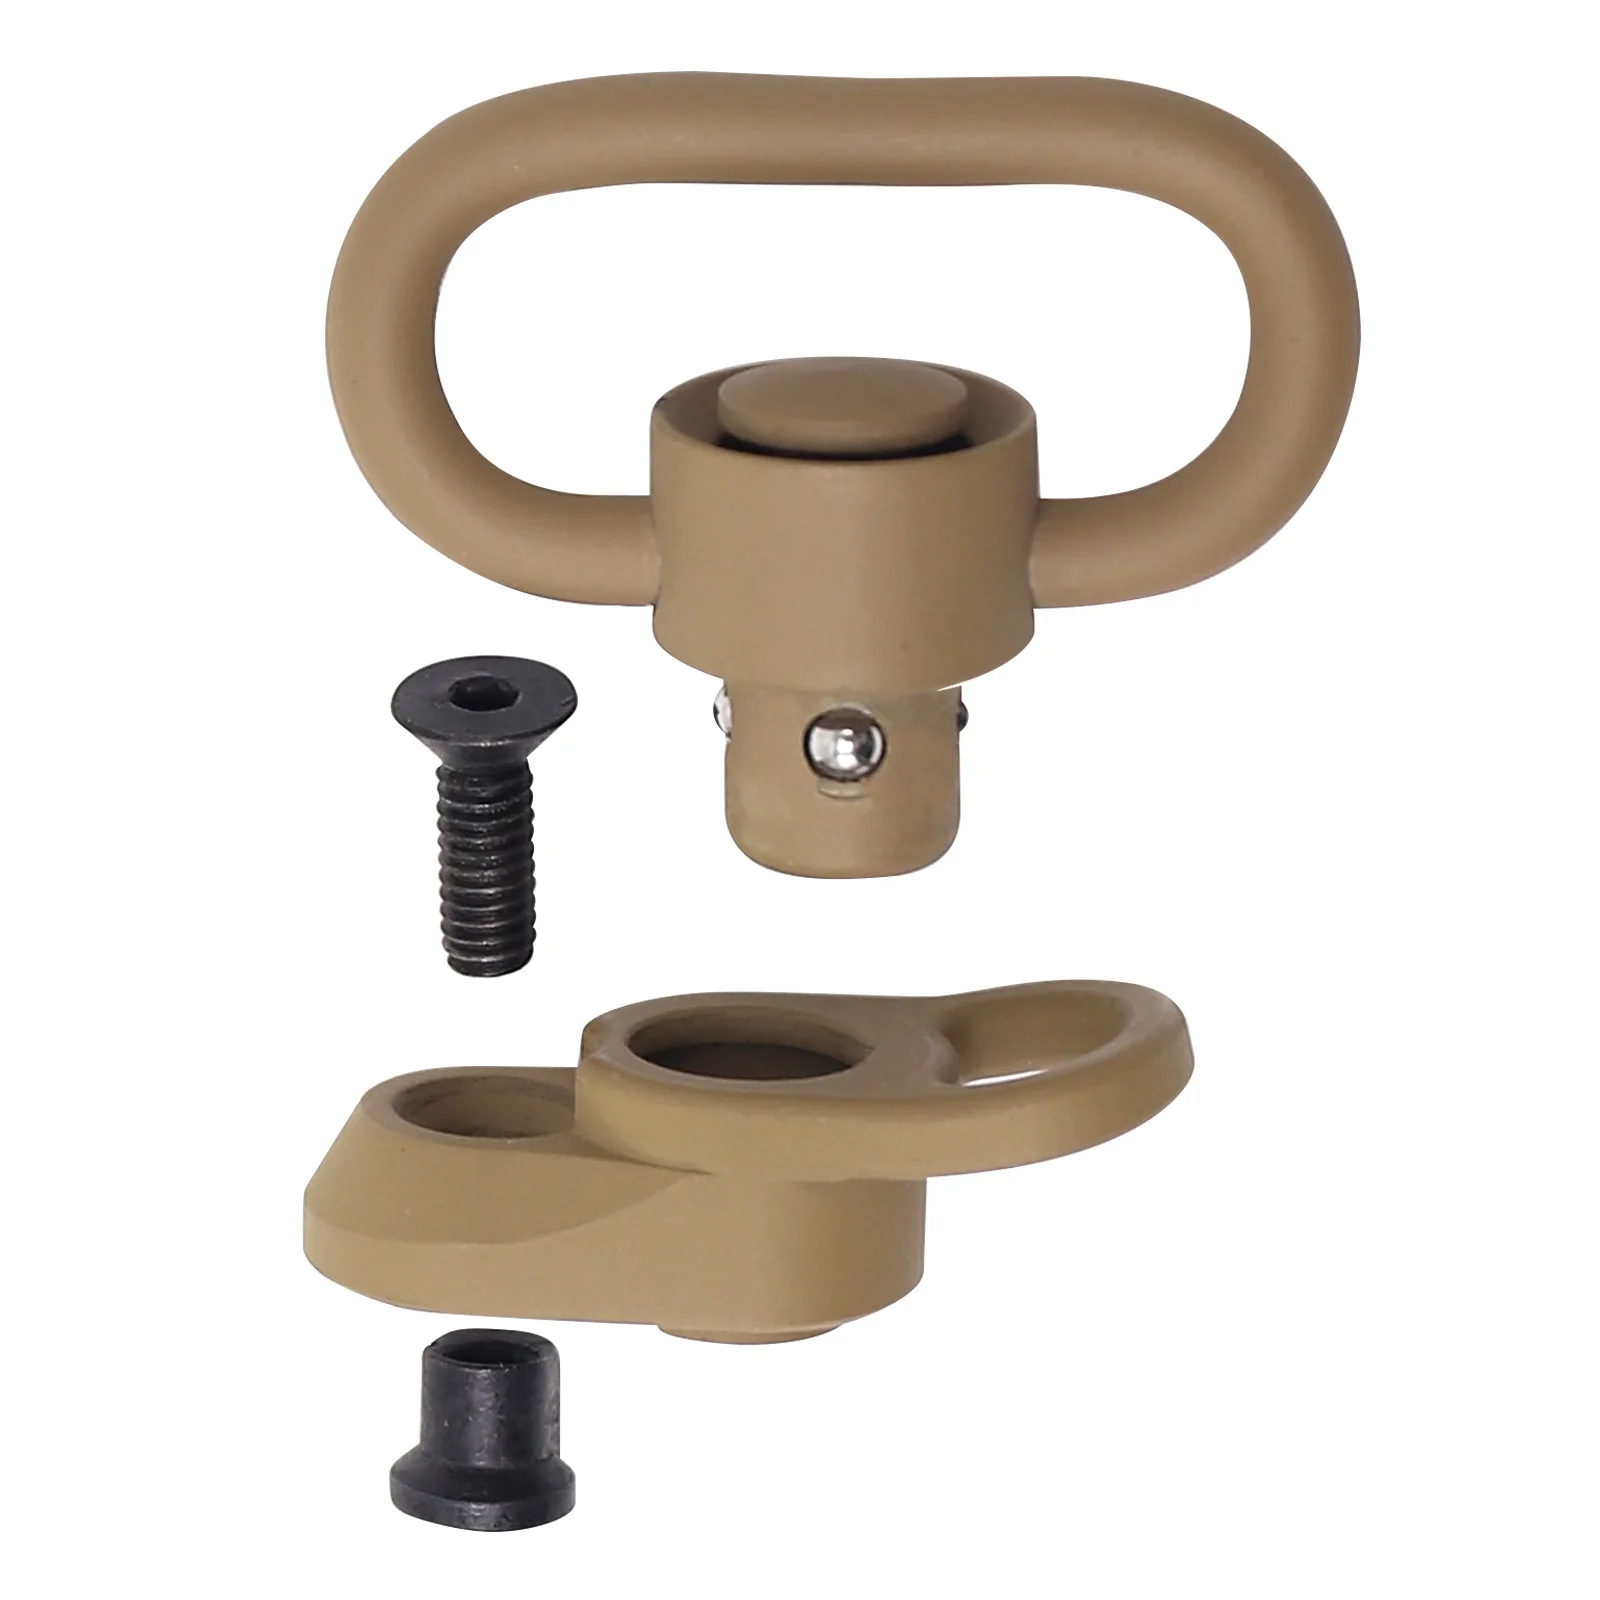 Trirock optional Keymod/M-LOK TAN/FDE  Push Button QD 1.25" sling swivel Base Mount or with Clever Hole for Snap Clip Hook